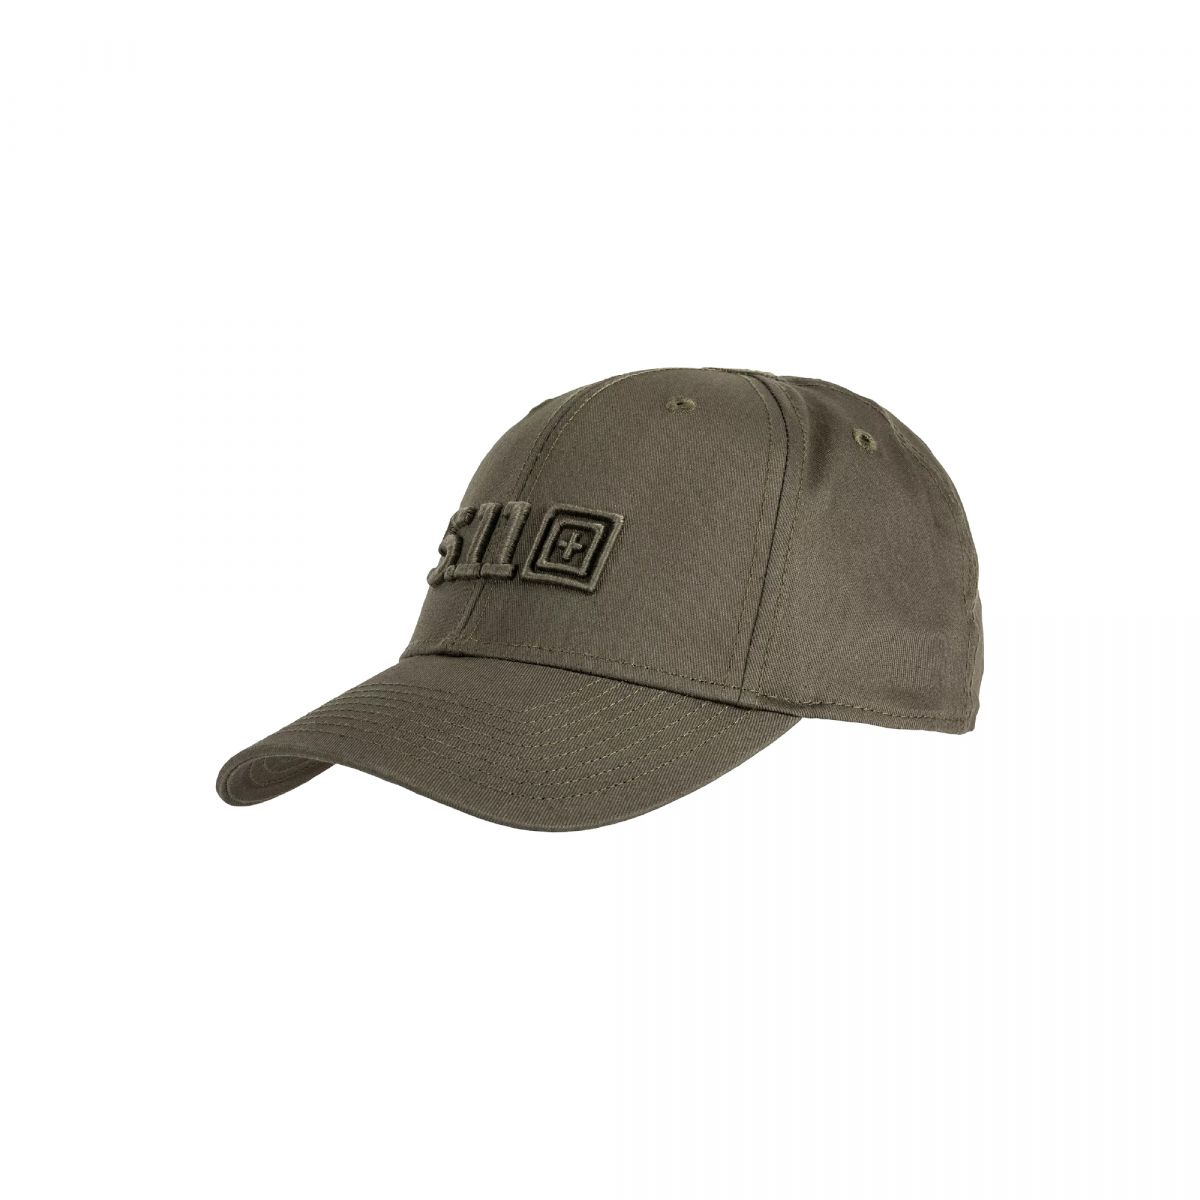 Кепка 5.11 Legacy Scout Cap. Green